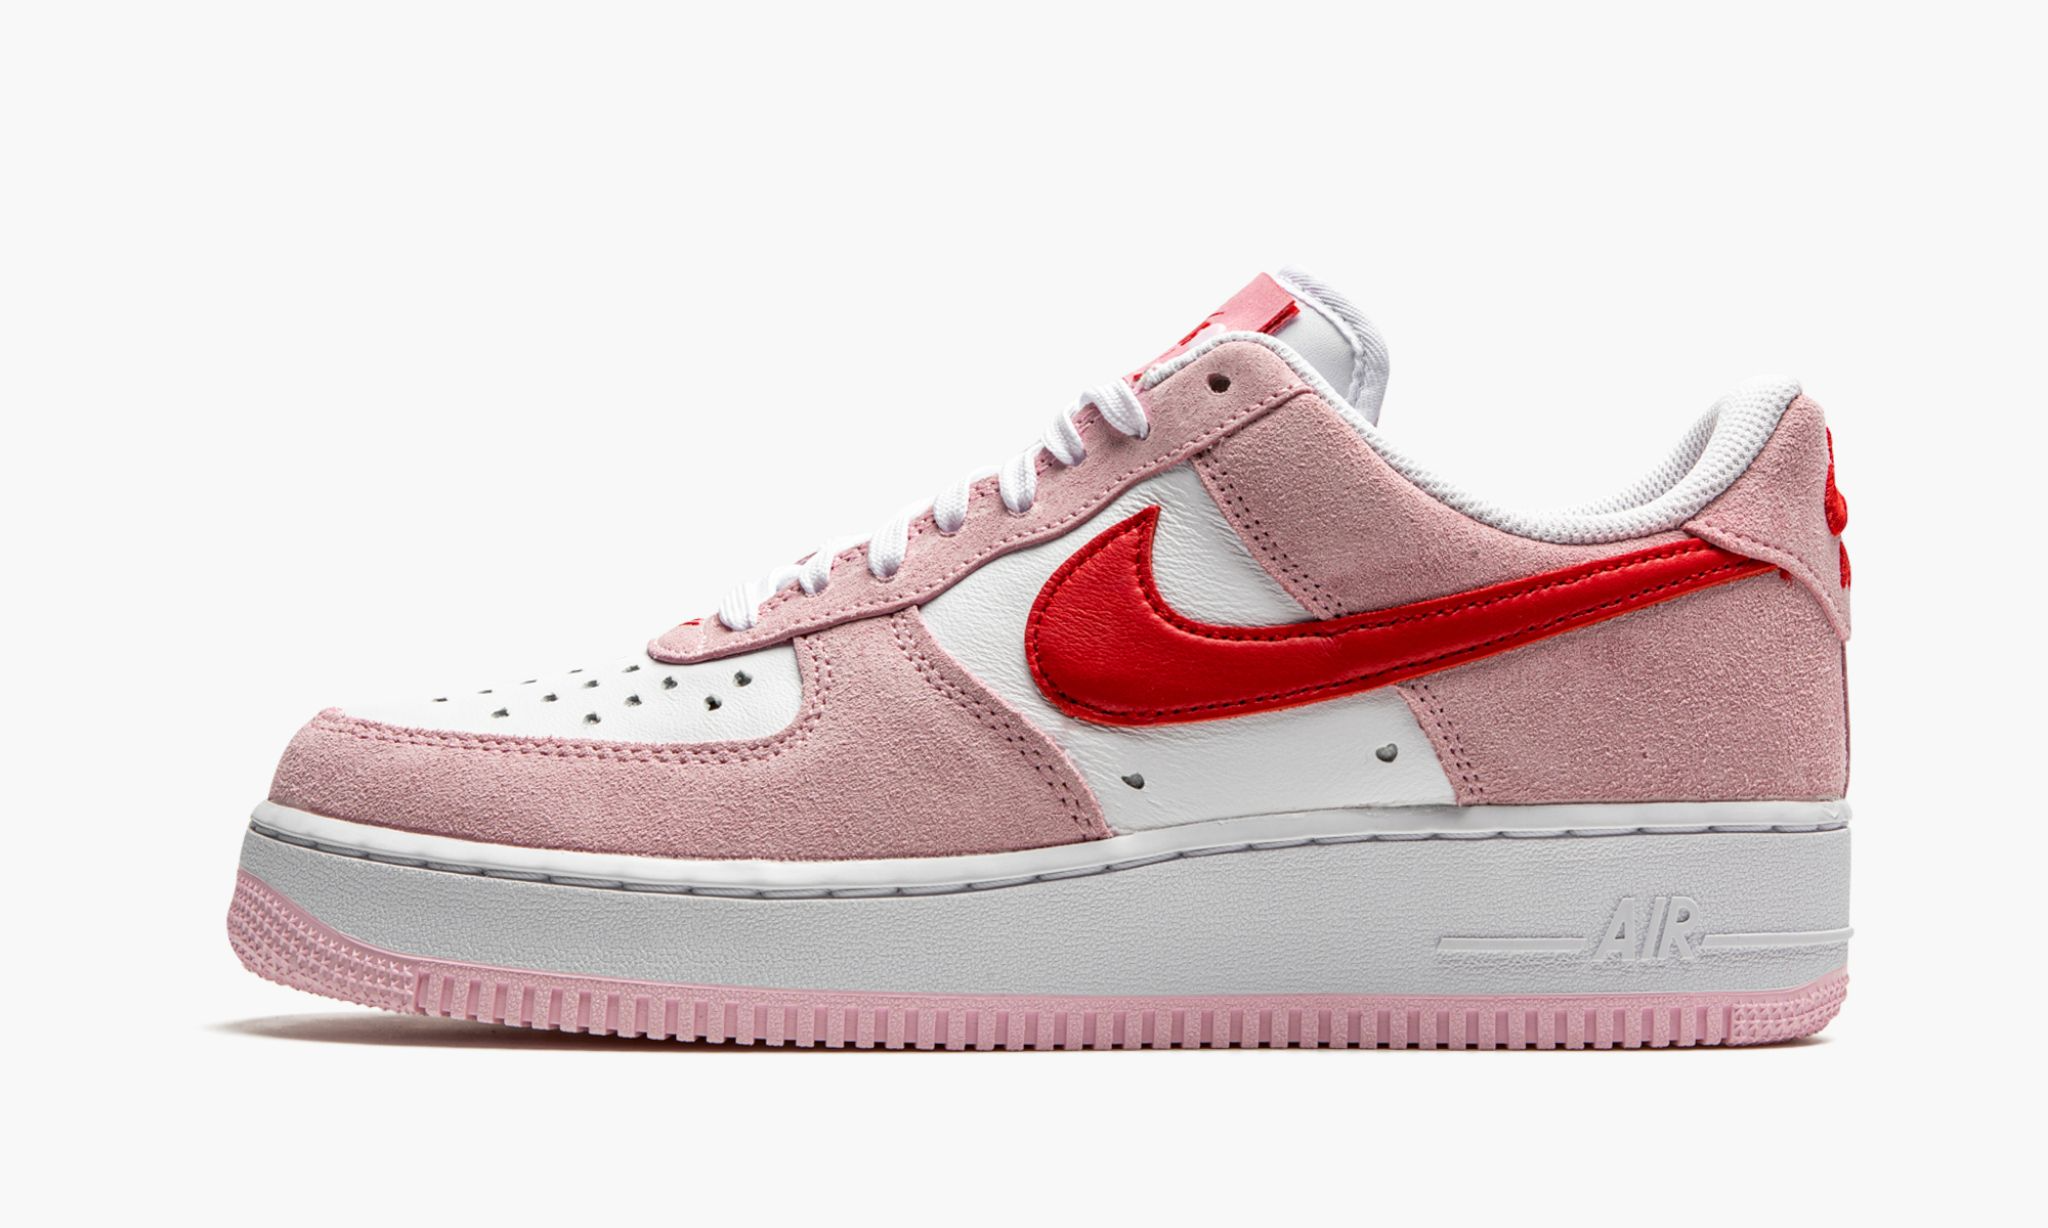 Аир лов. Nike Air Force 1 Low Valentines Day 2021. Nike Air Force 1 Low “Valentine’s Day” 2023. Nike Air Force 1 Low Valentines Day. Nike Air Force 1 Valentines Day 2021.